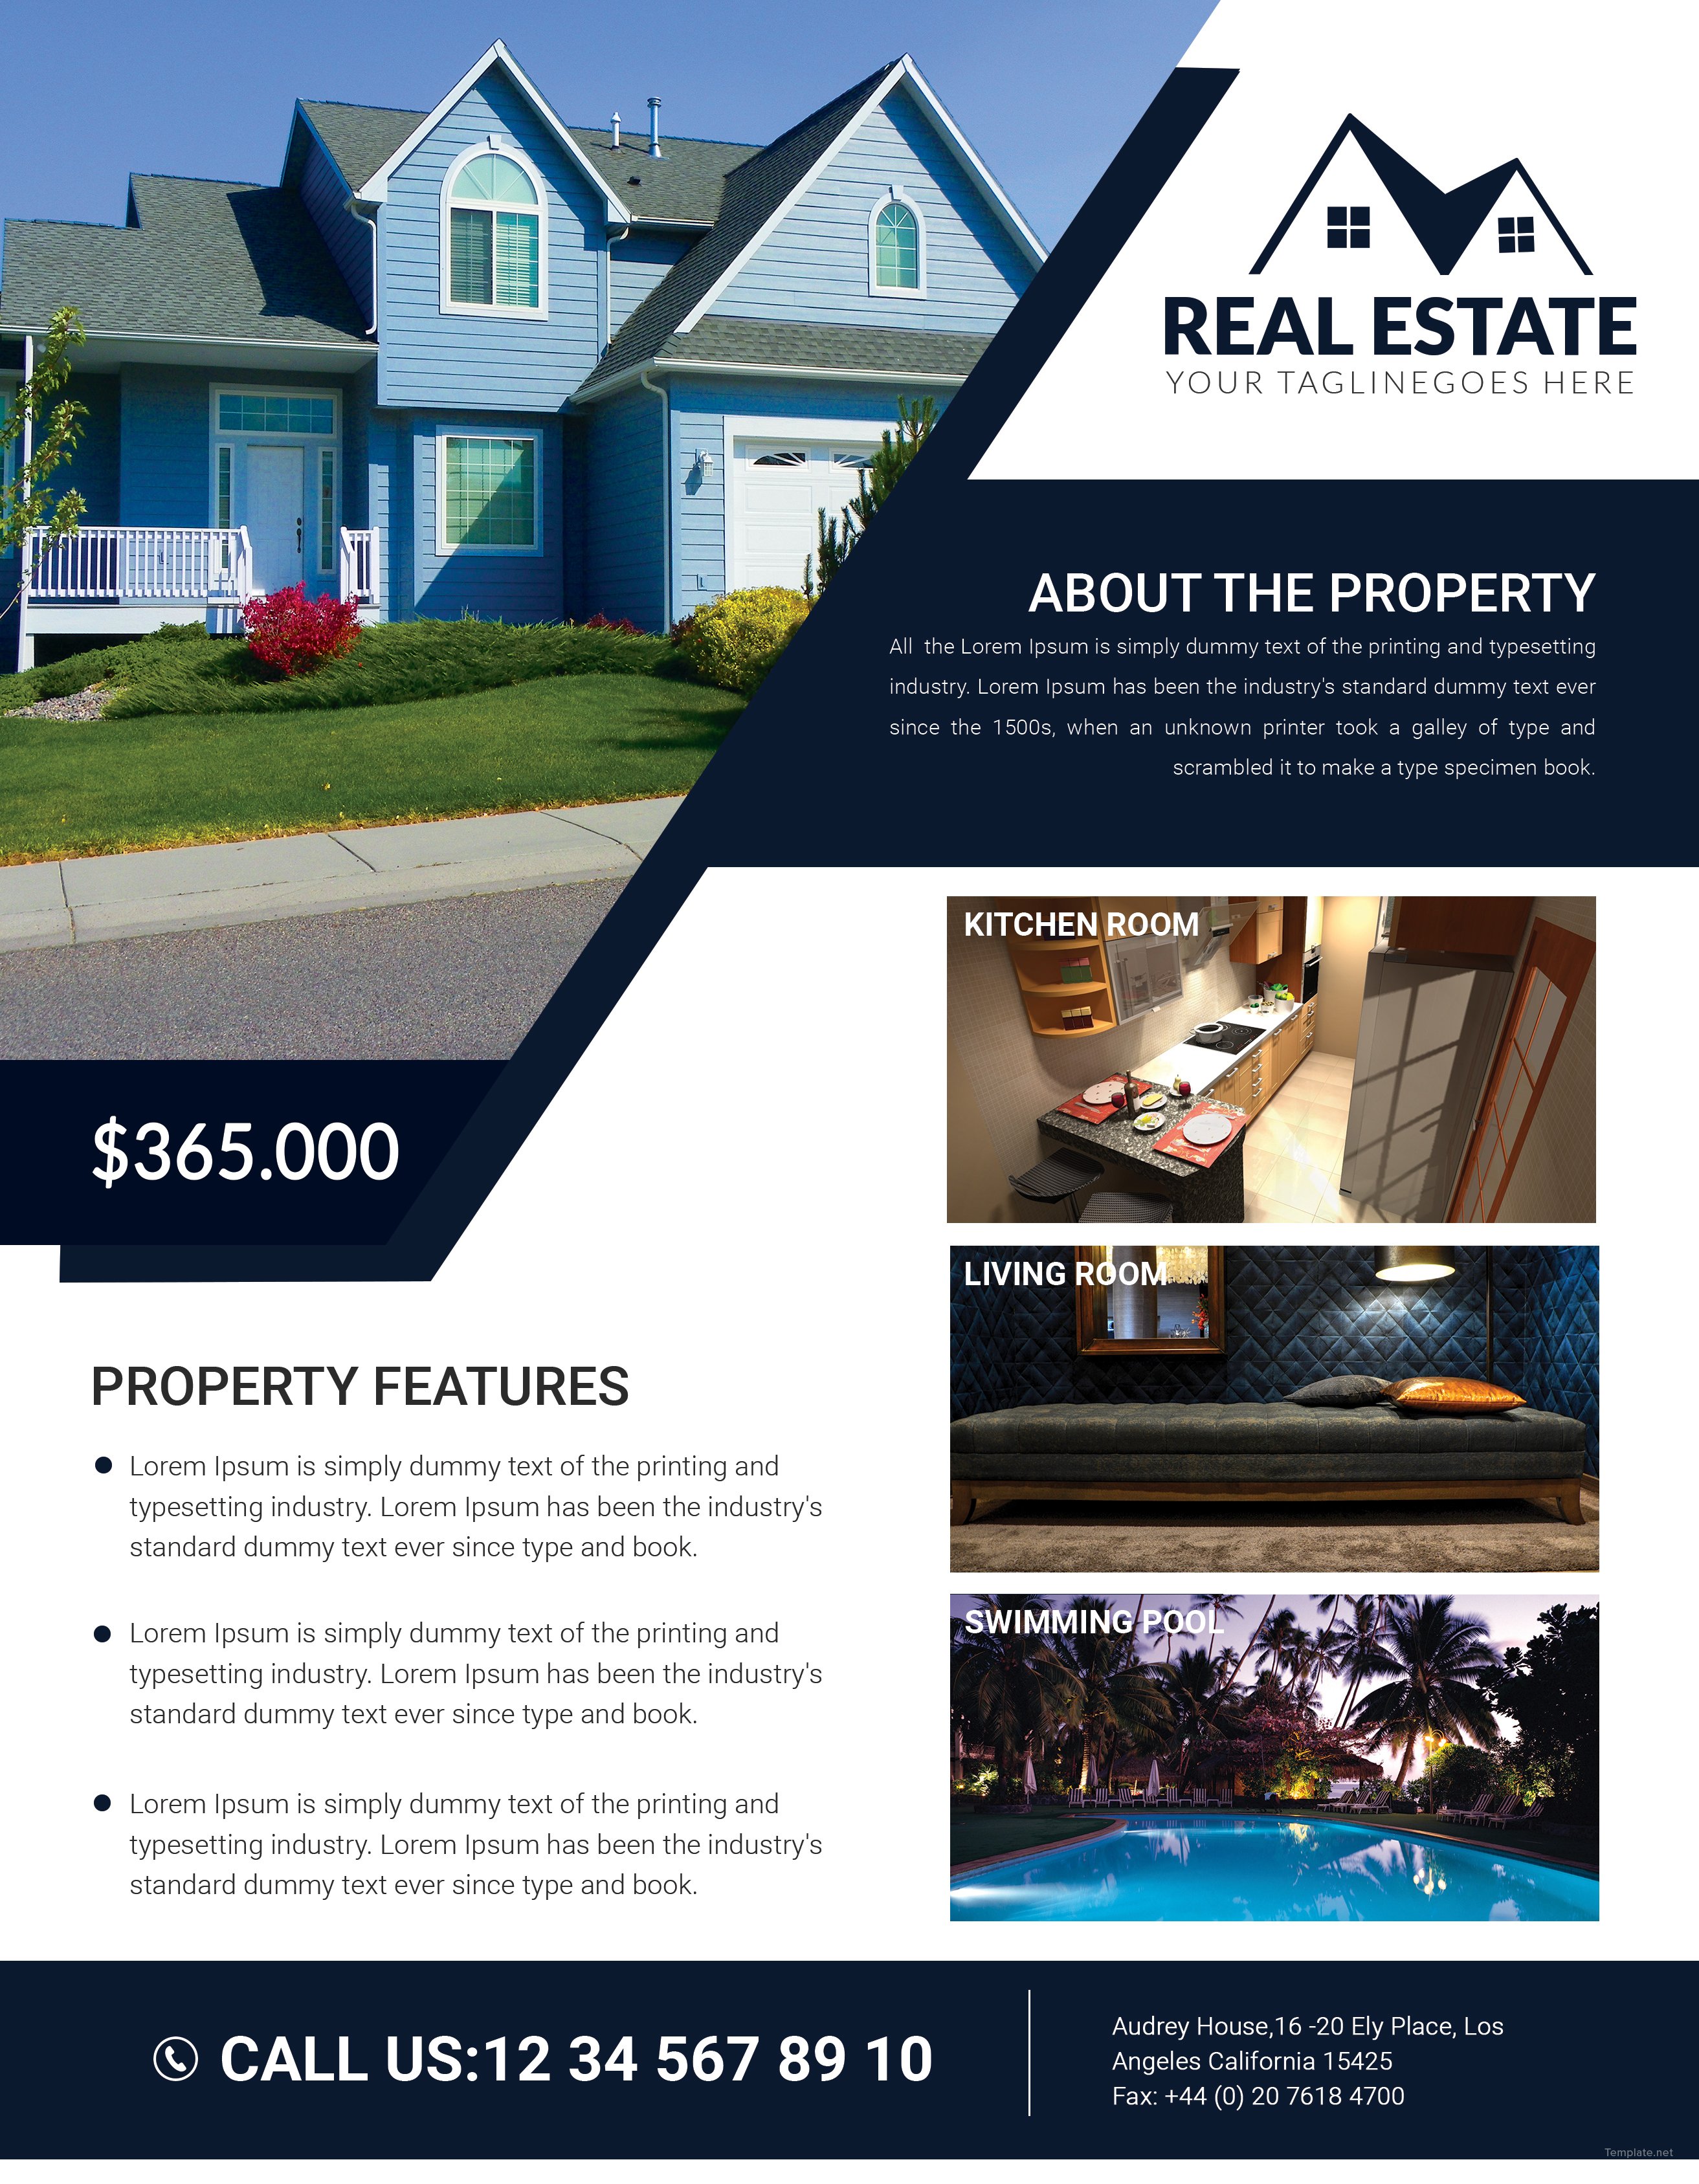 Free Real Estate House Flyer Template in Adobe Photoshop, Illustrator ...